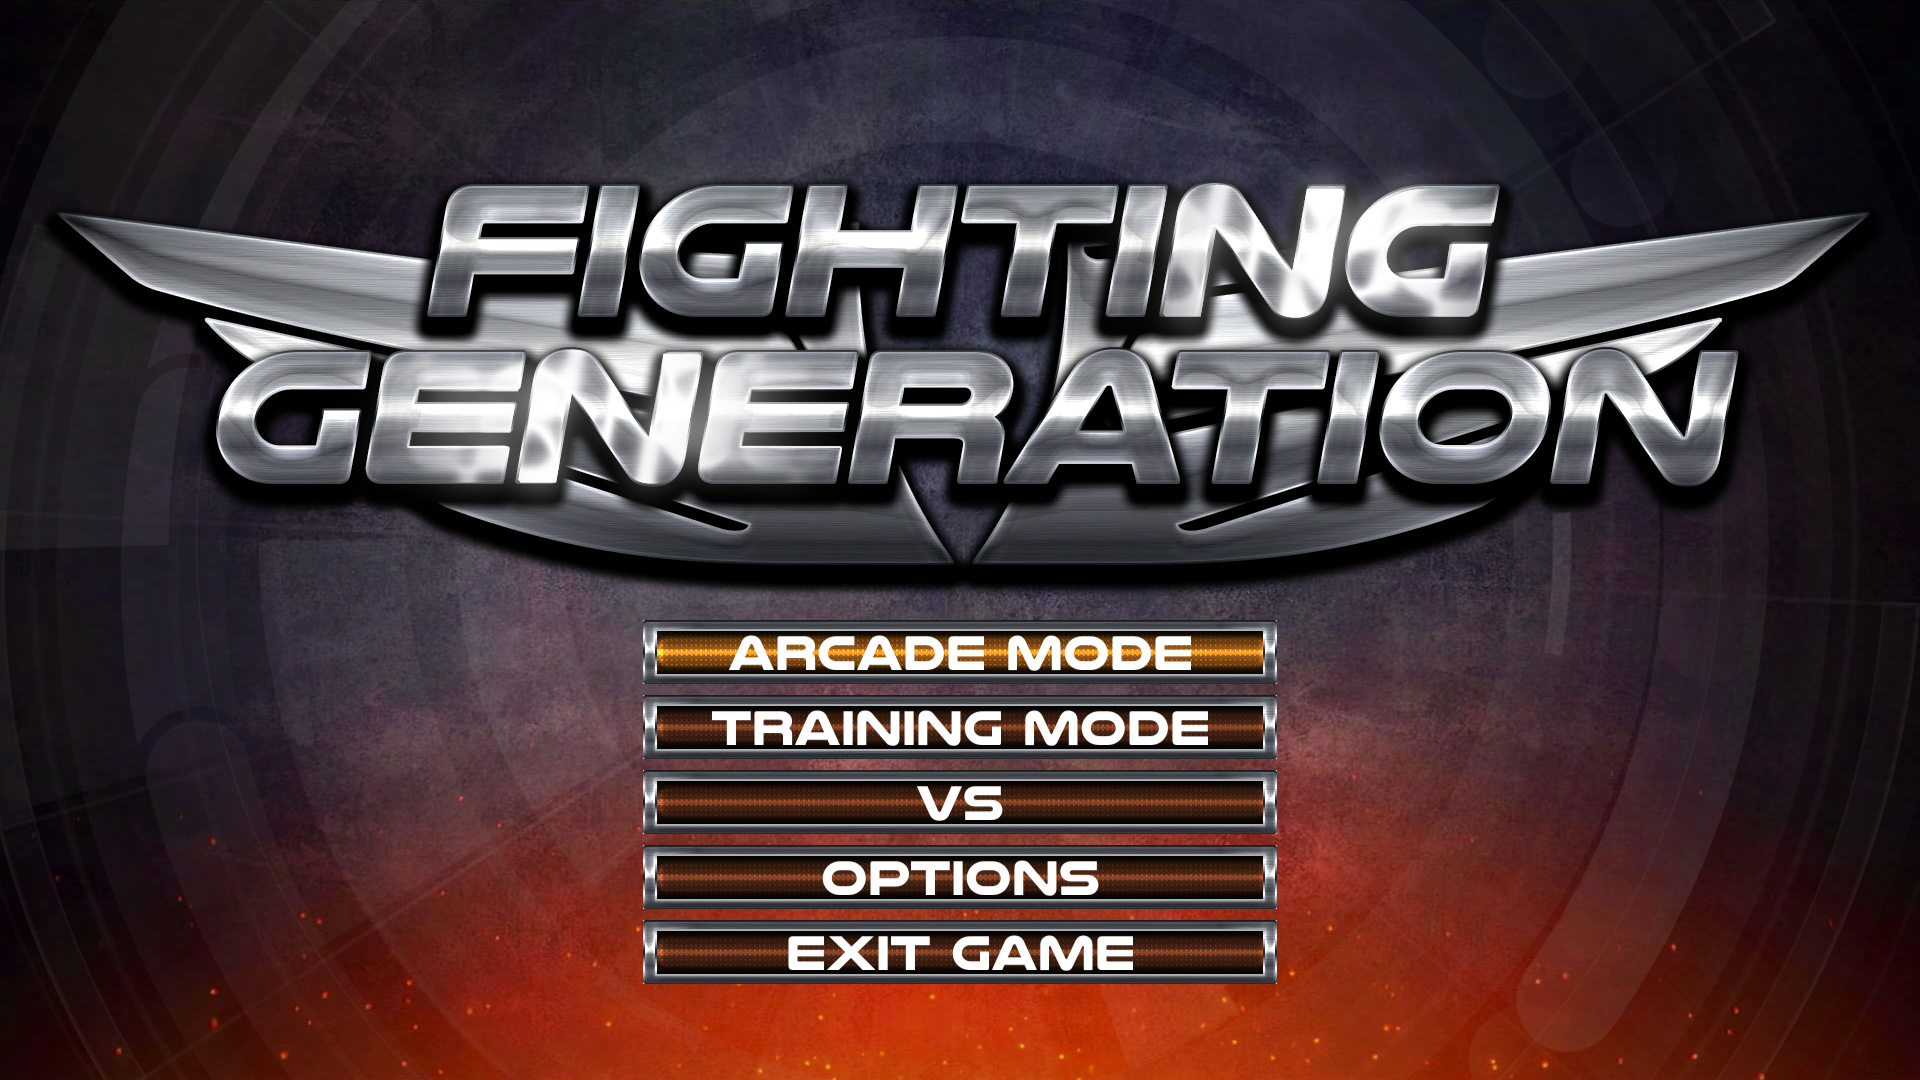 History generation in game. New Media Generation игры. Fighters Generation. Игры поколений надпись. Universal Fighters.